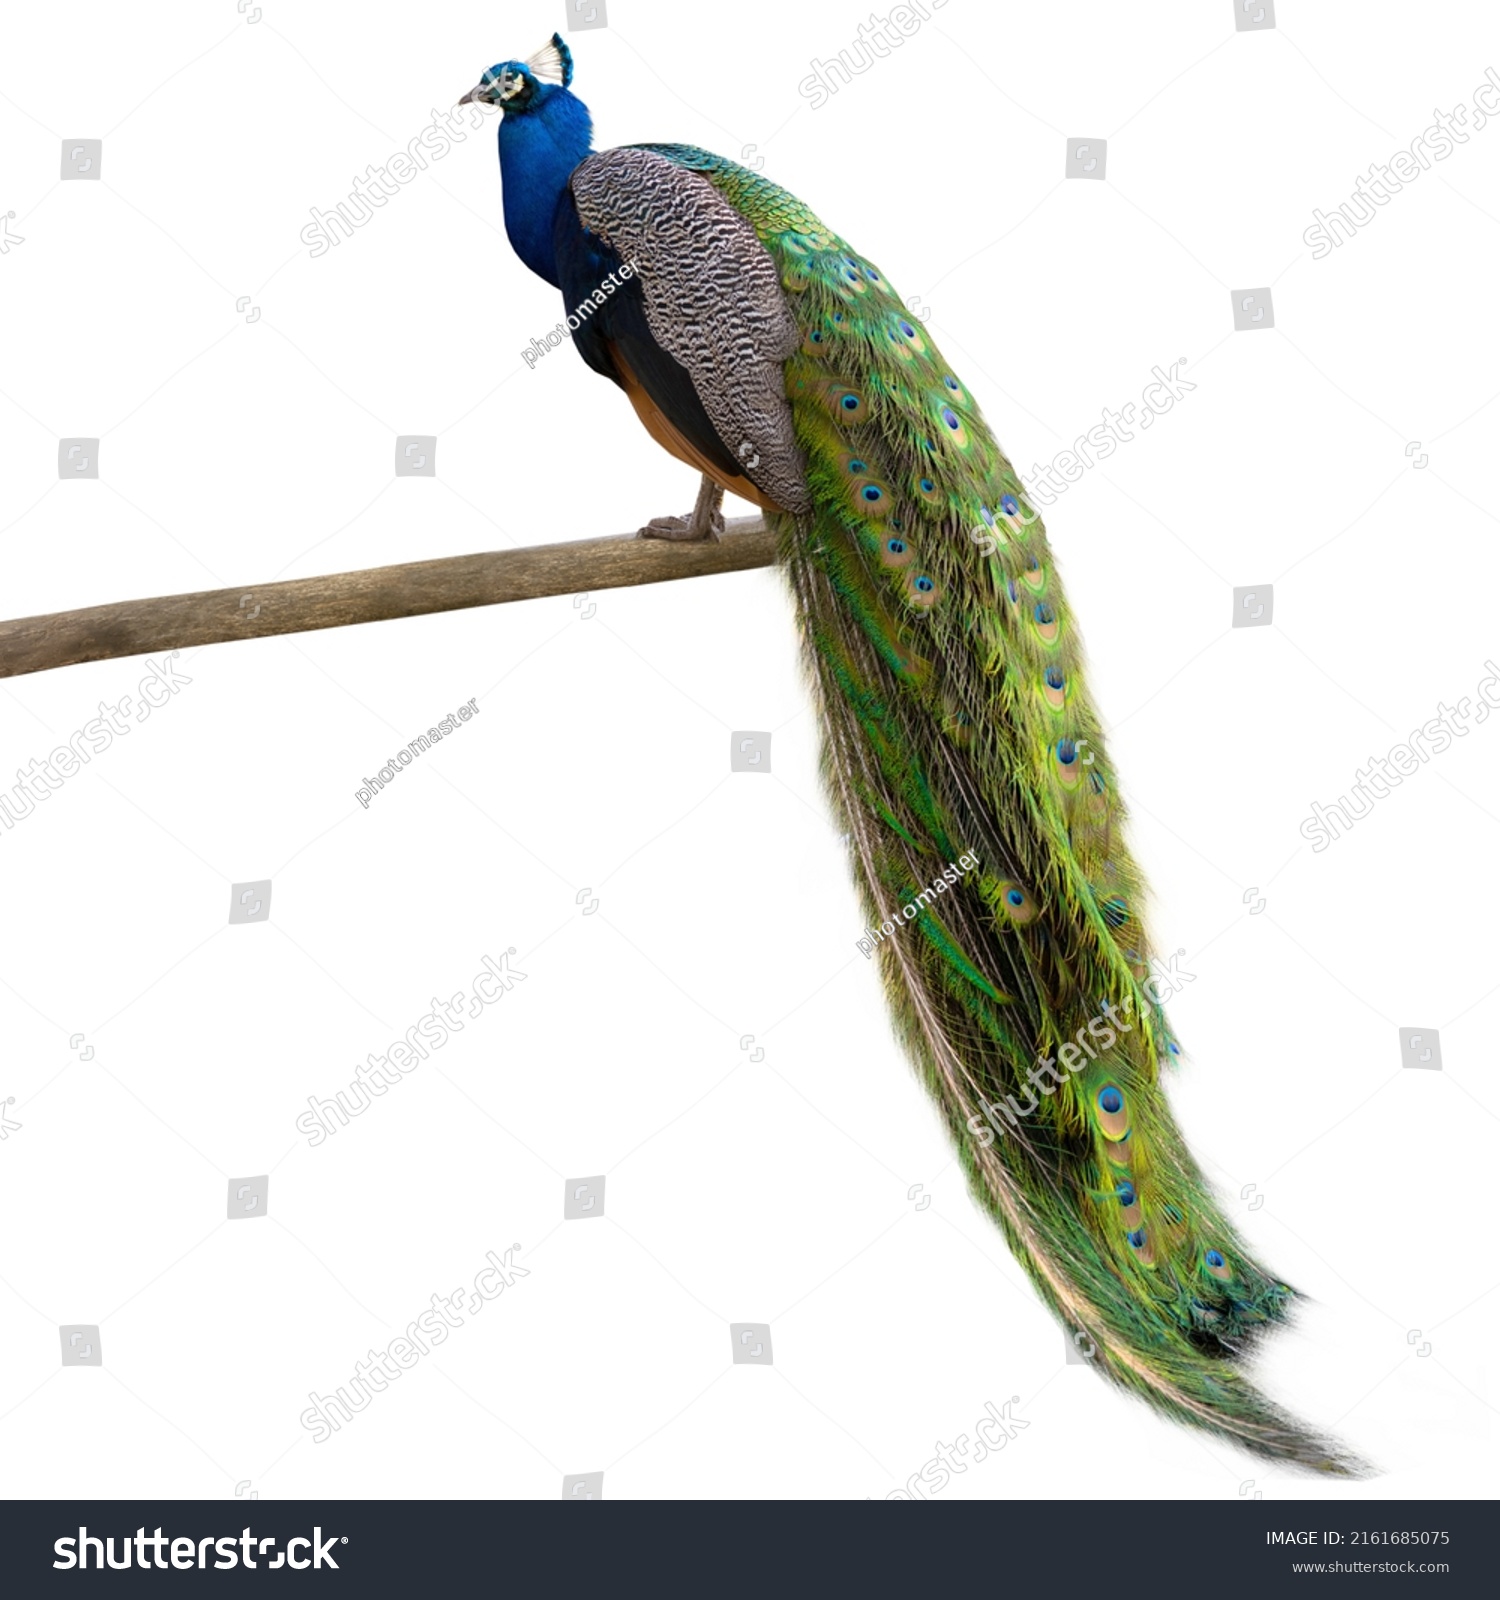 blue peacock isolated on white background #2161685075